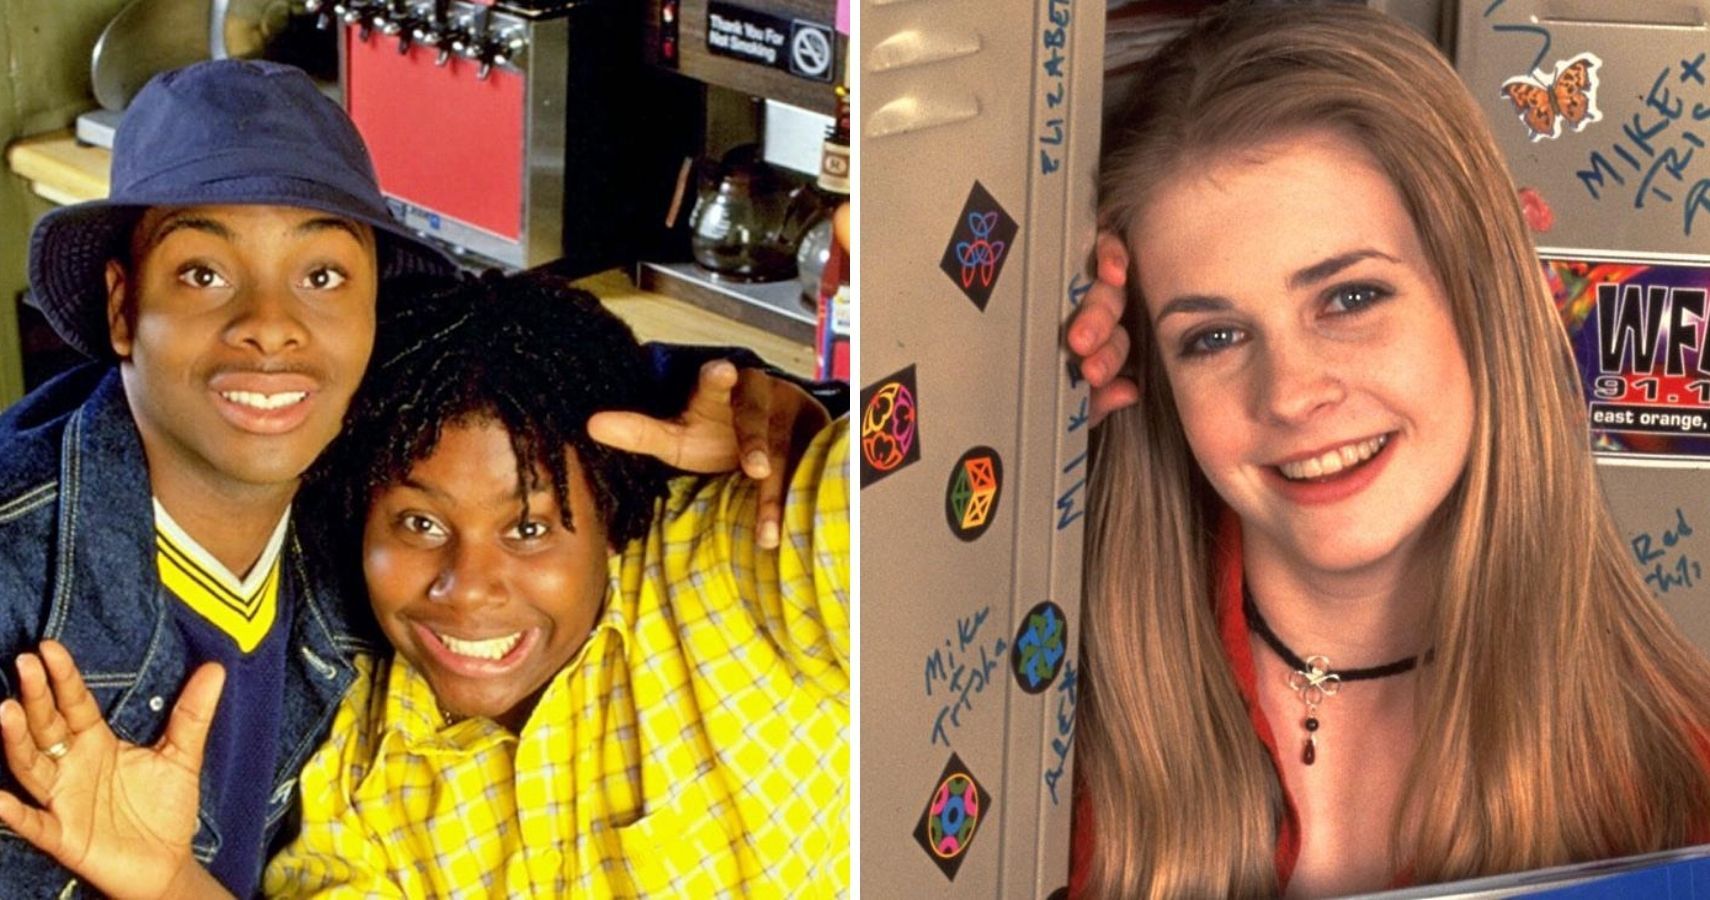 10 Best Live Action Nickelodeon Shows of the 90s Ranked According to IMDb